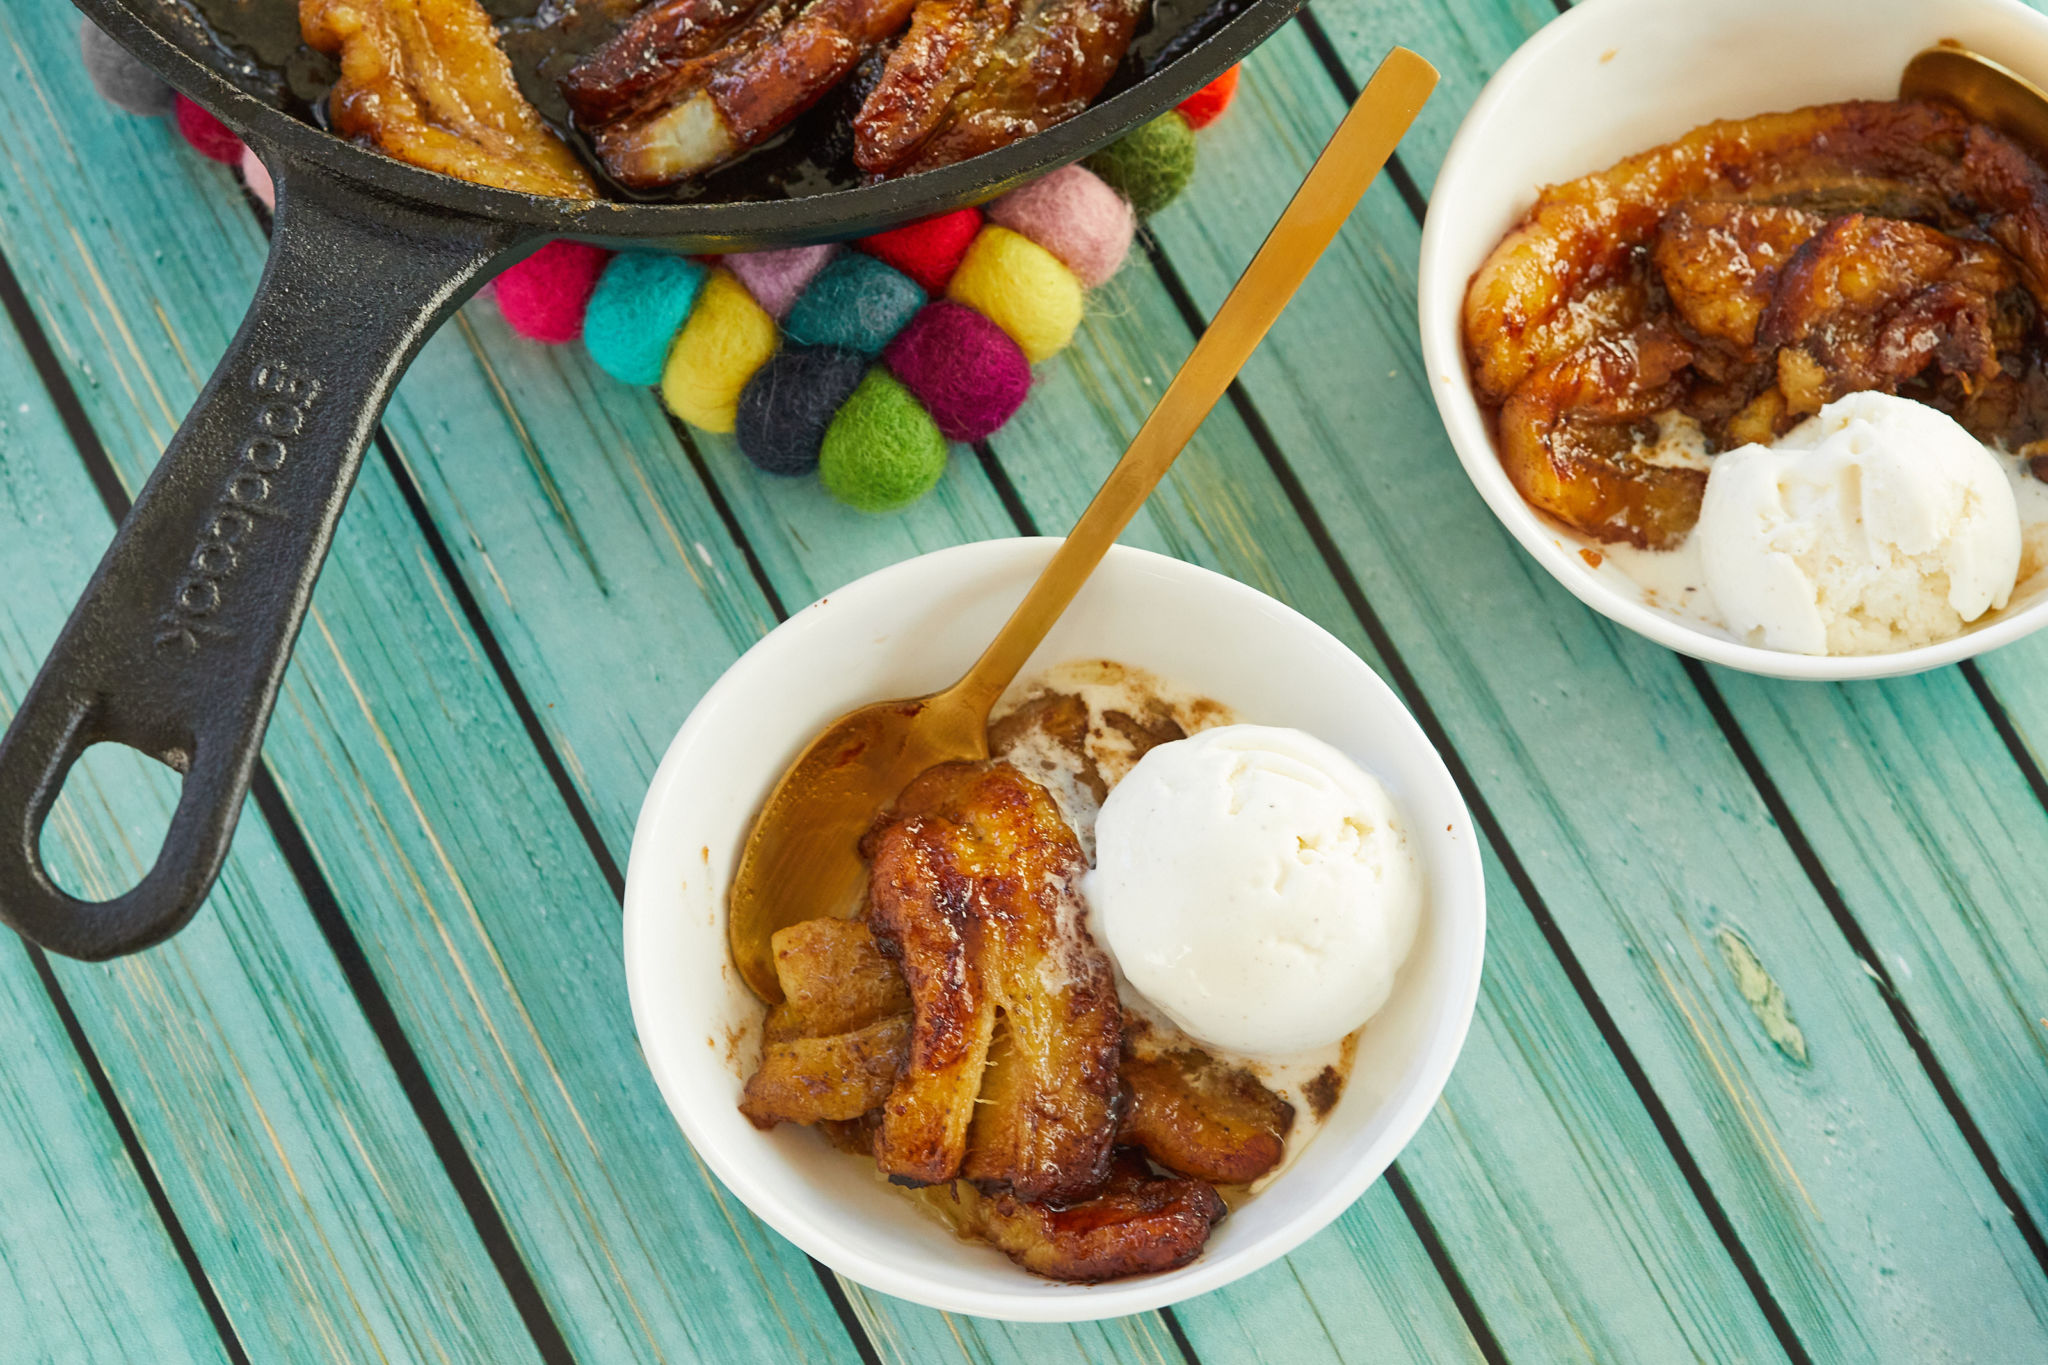 My bananas foster recipe served into two bowls with vanilla ice cream.